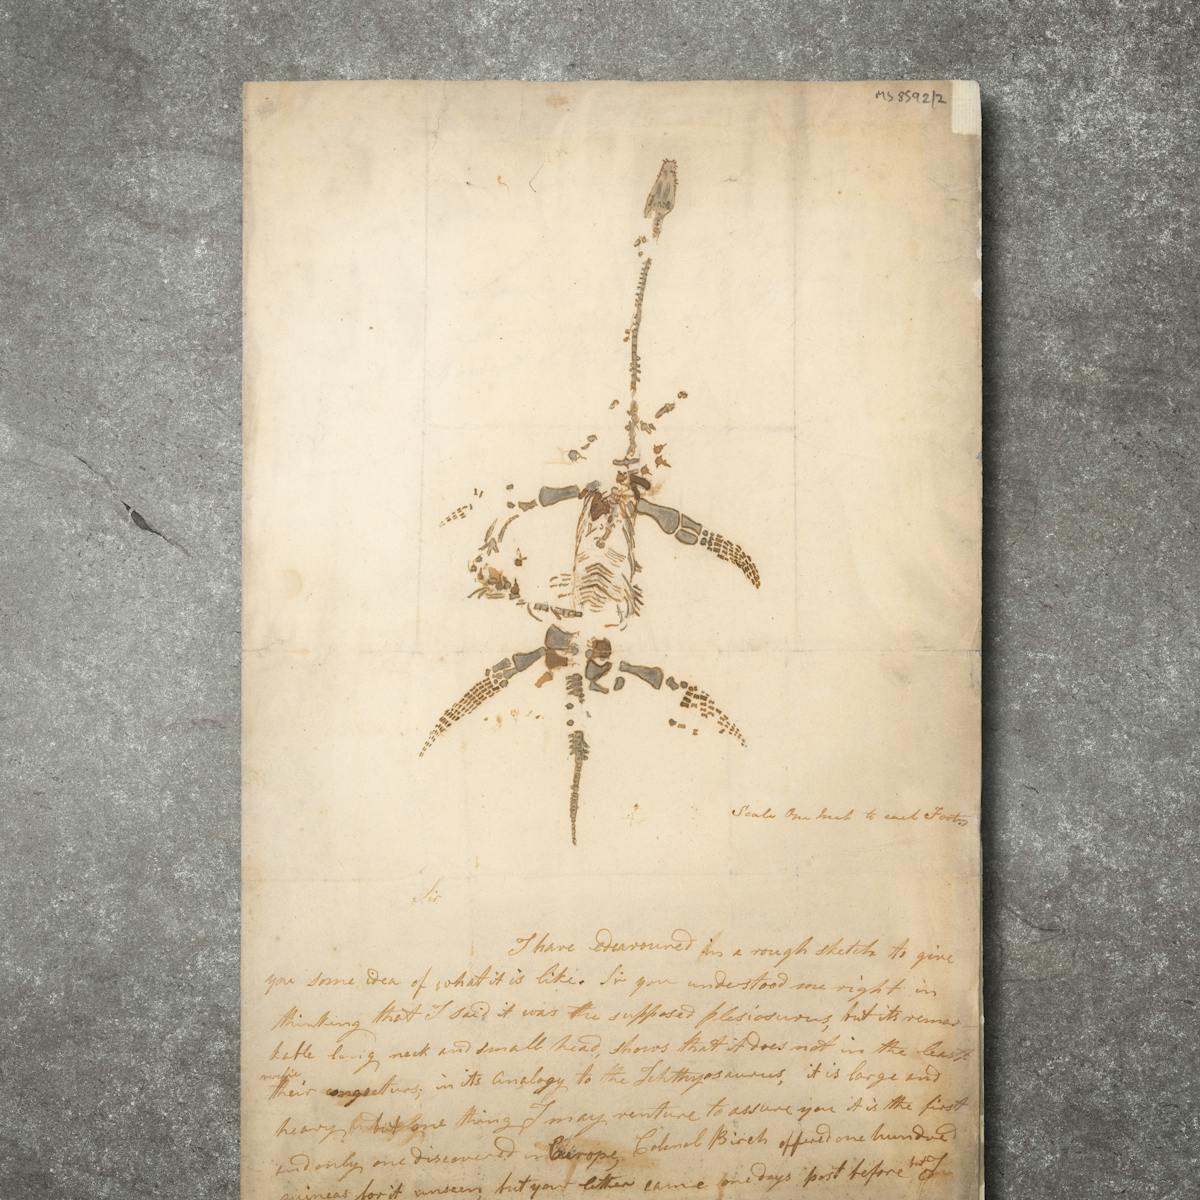 A photograph of a 19th century handwritten document on a concrete background. The document has a large sketch of the bone structure of a plesiosauras dinosaur, signed by Mary Anning. The skeleton has four limbs made up of numerous bones and a long neck which is surrounded by other pieces of bone.